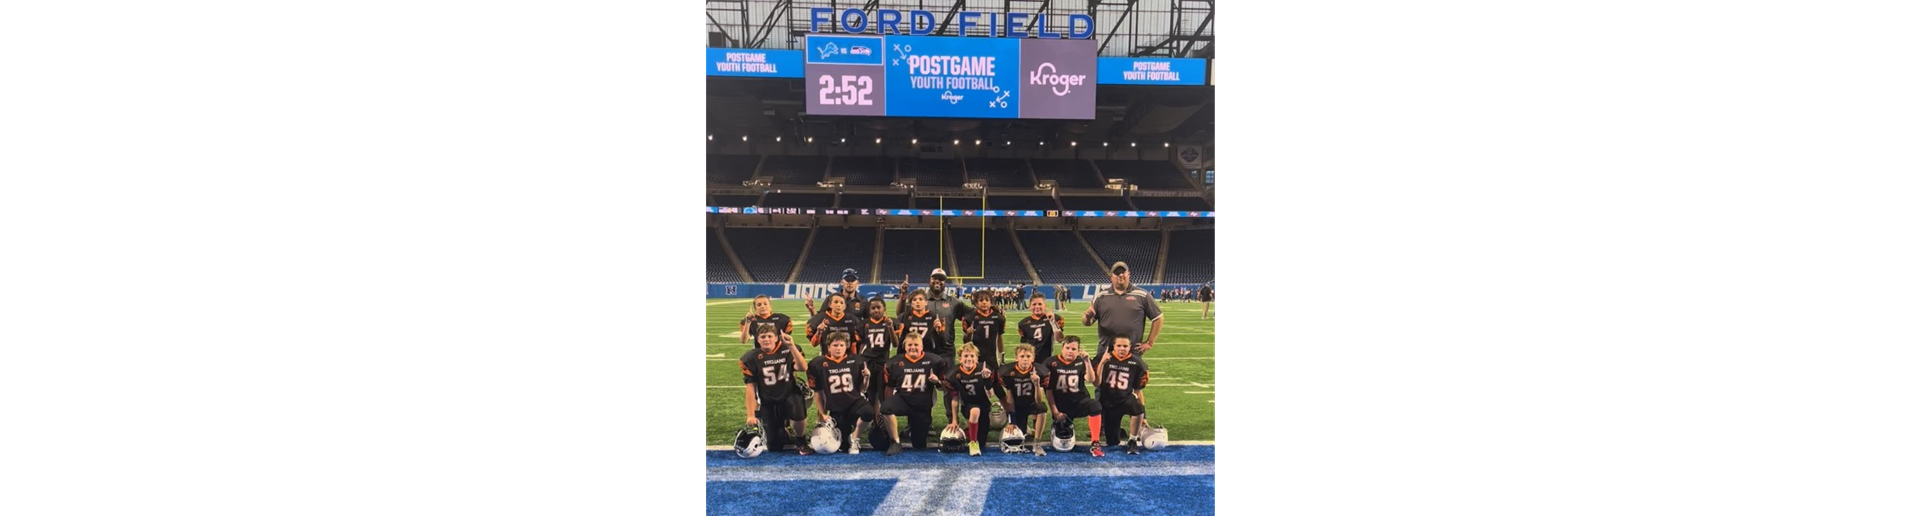 Team Grimes Ford Field